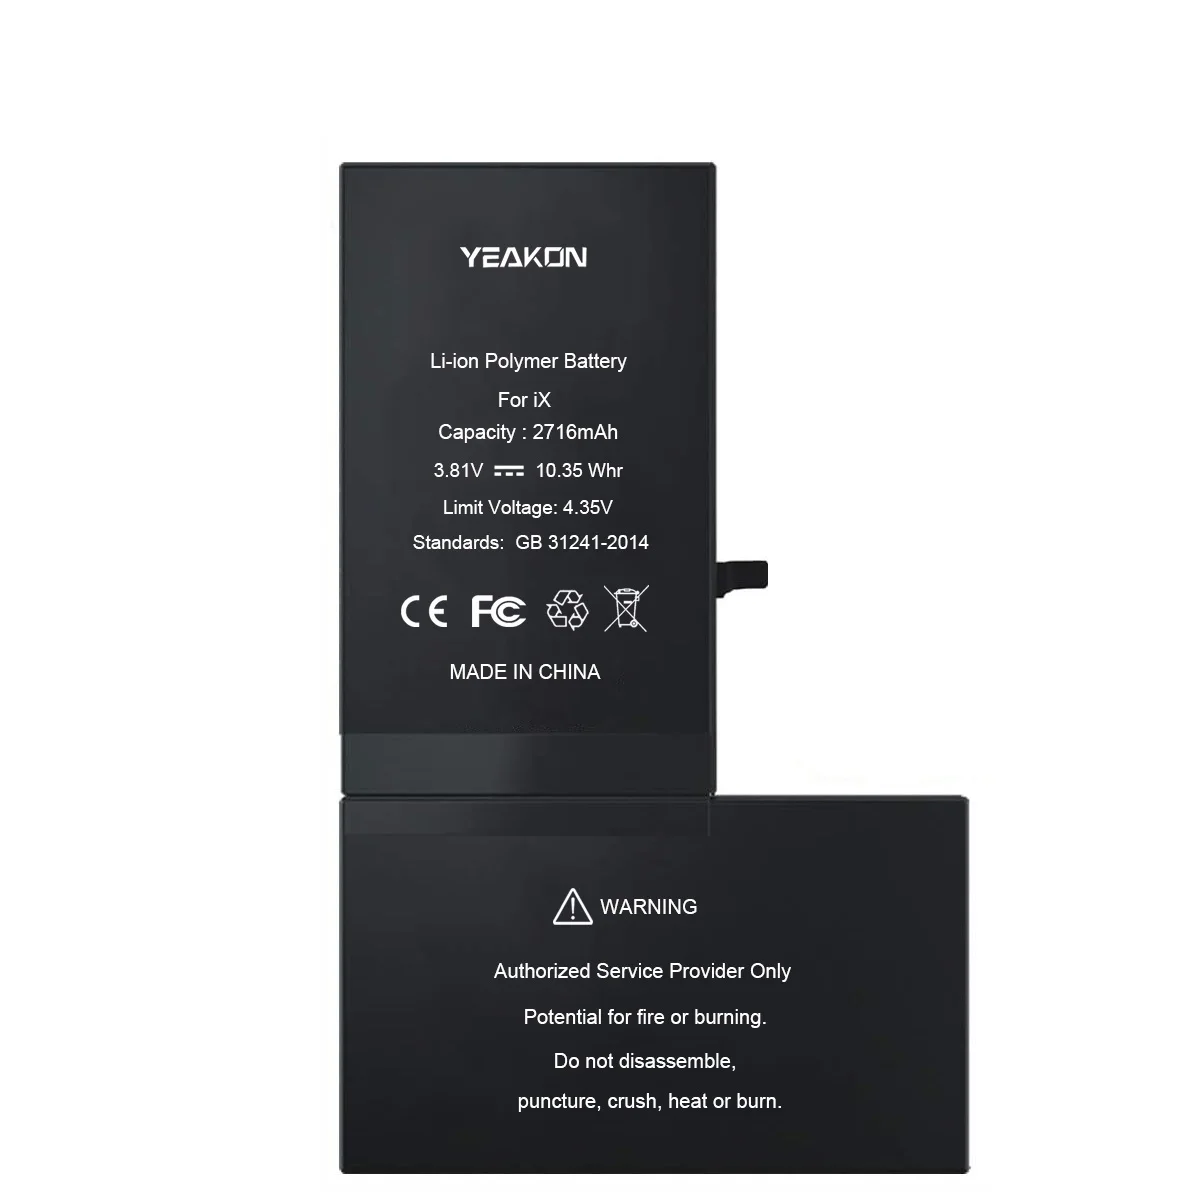 

YEAKON X IX 8X Battery Replacement For iPhone 5 5S 5C SE 6 6S 6P 6SP 7 7G 7P 8 8G 8P Plus X XS MAX XR 11 12 13 Pro MAX Batteries